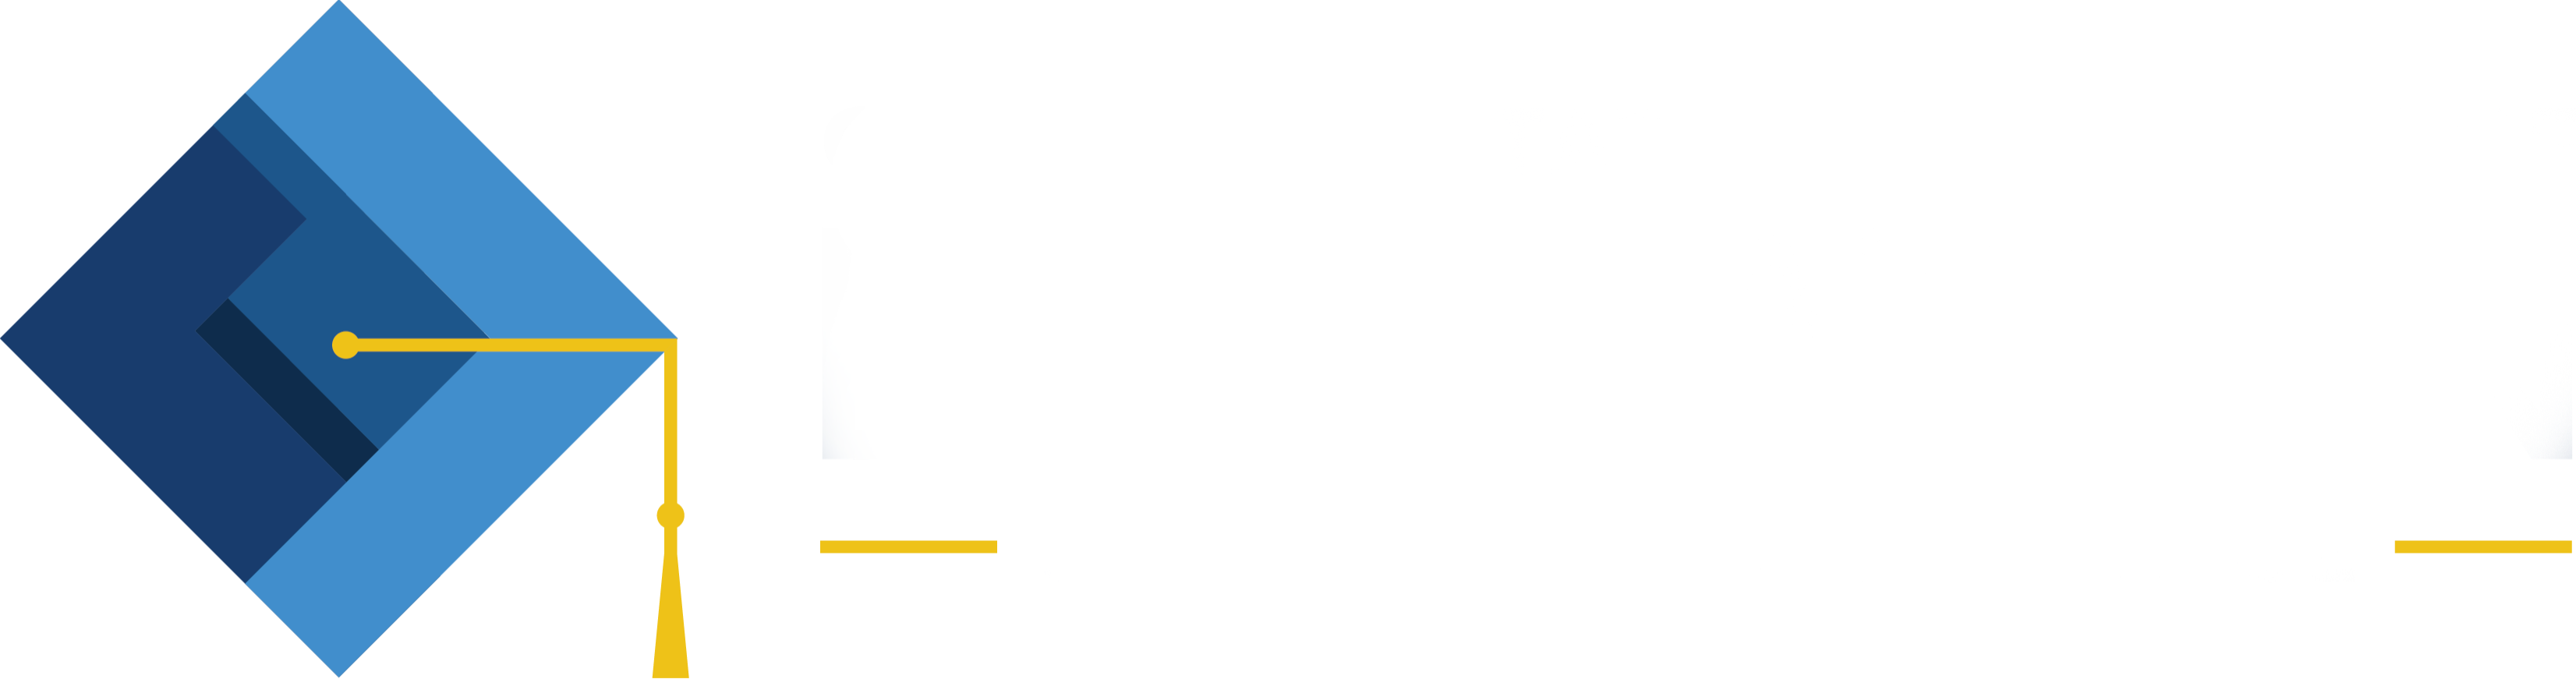 oklahoma state department of education